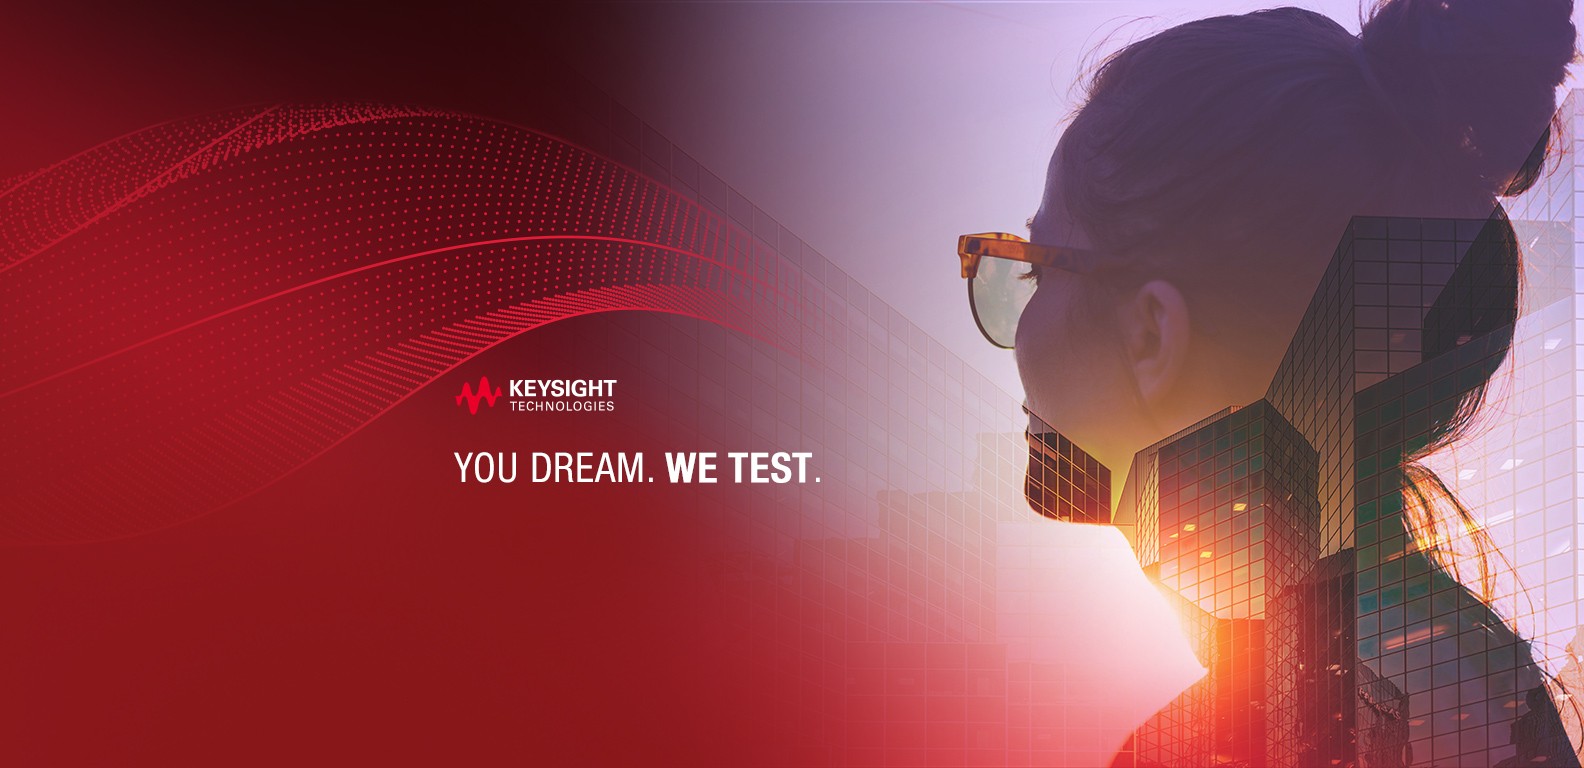 The photograph of a spectacled woman is overlay over a picture of buildings with wavy patterns with the logo and caption of Keysight Technologies to the left